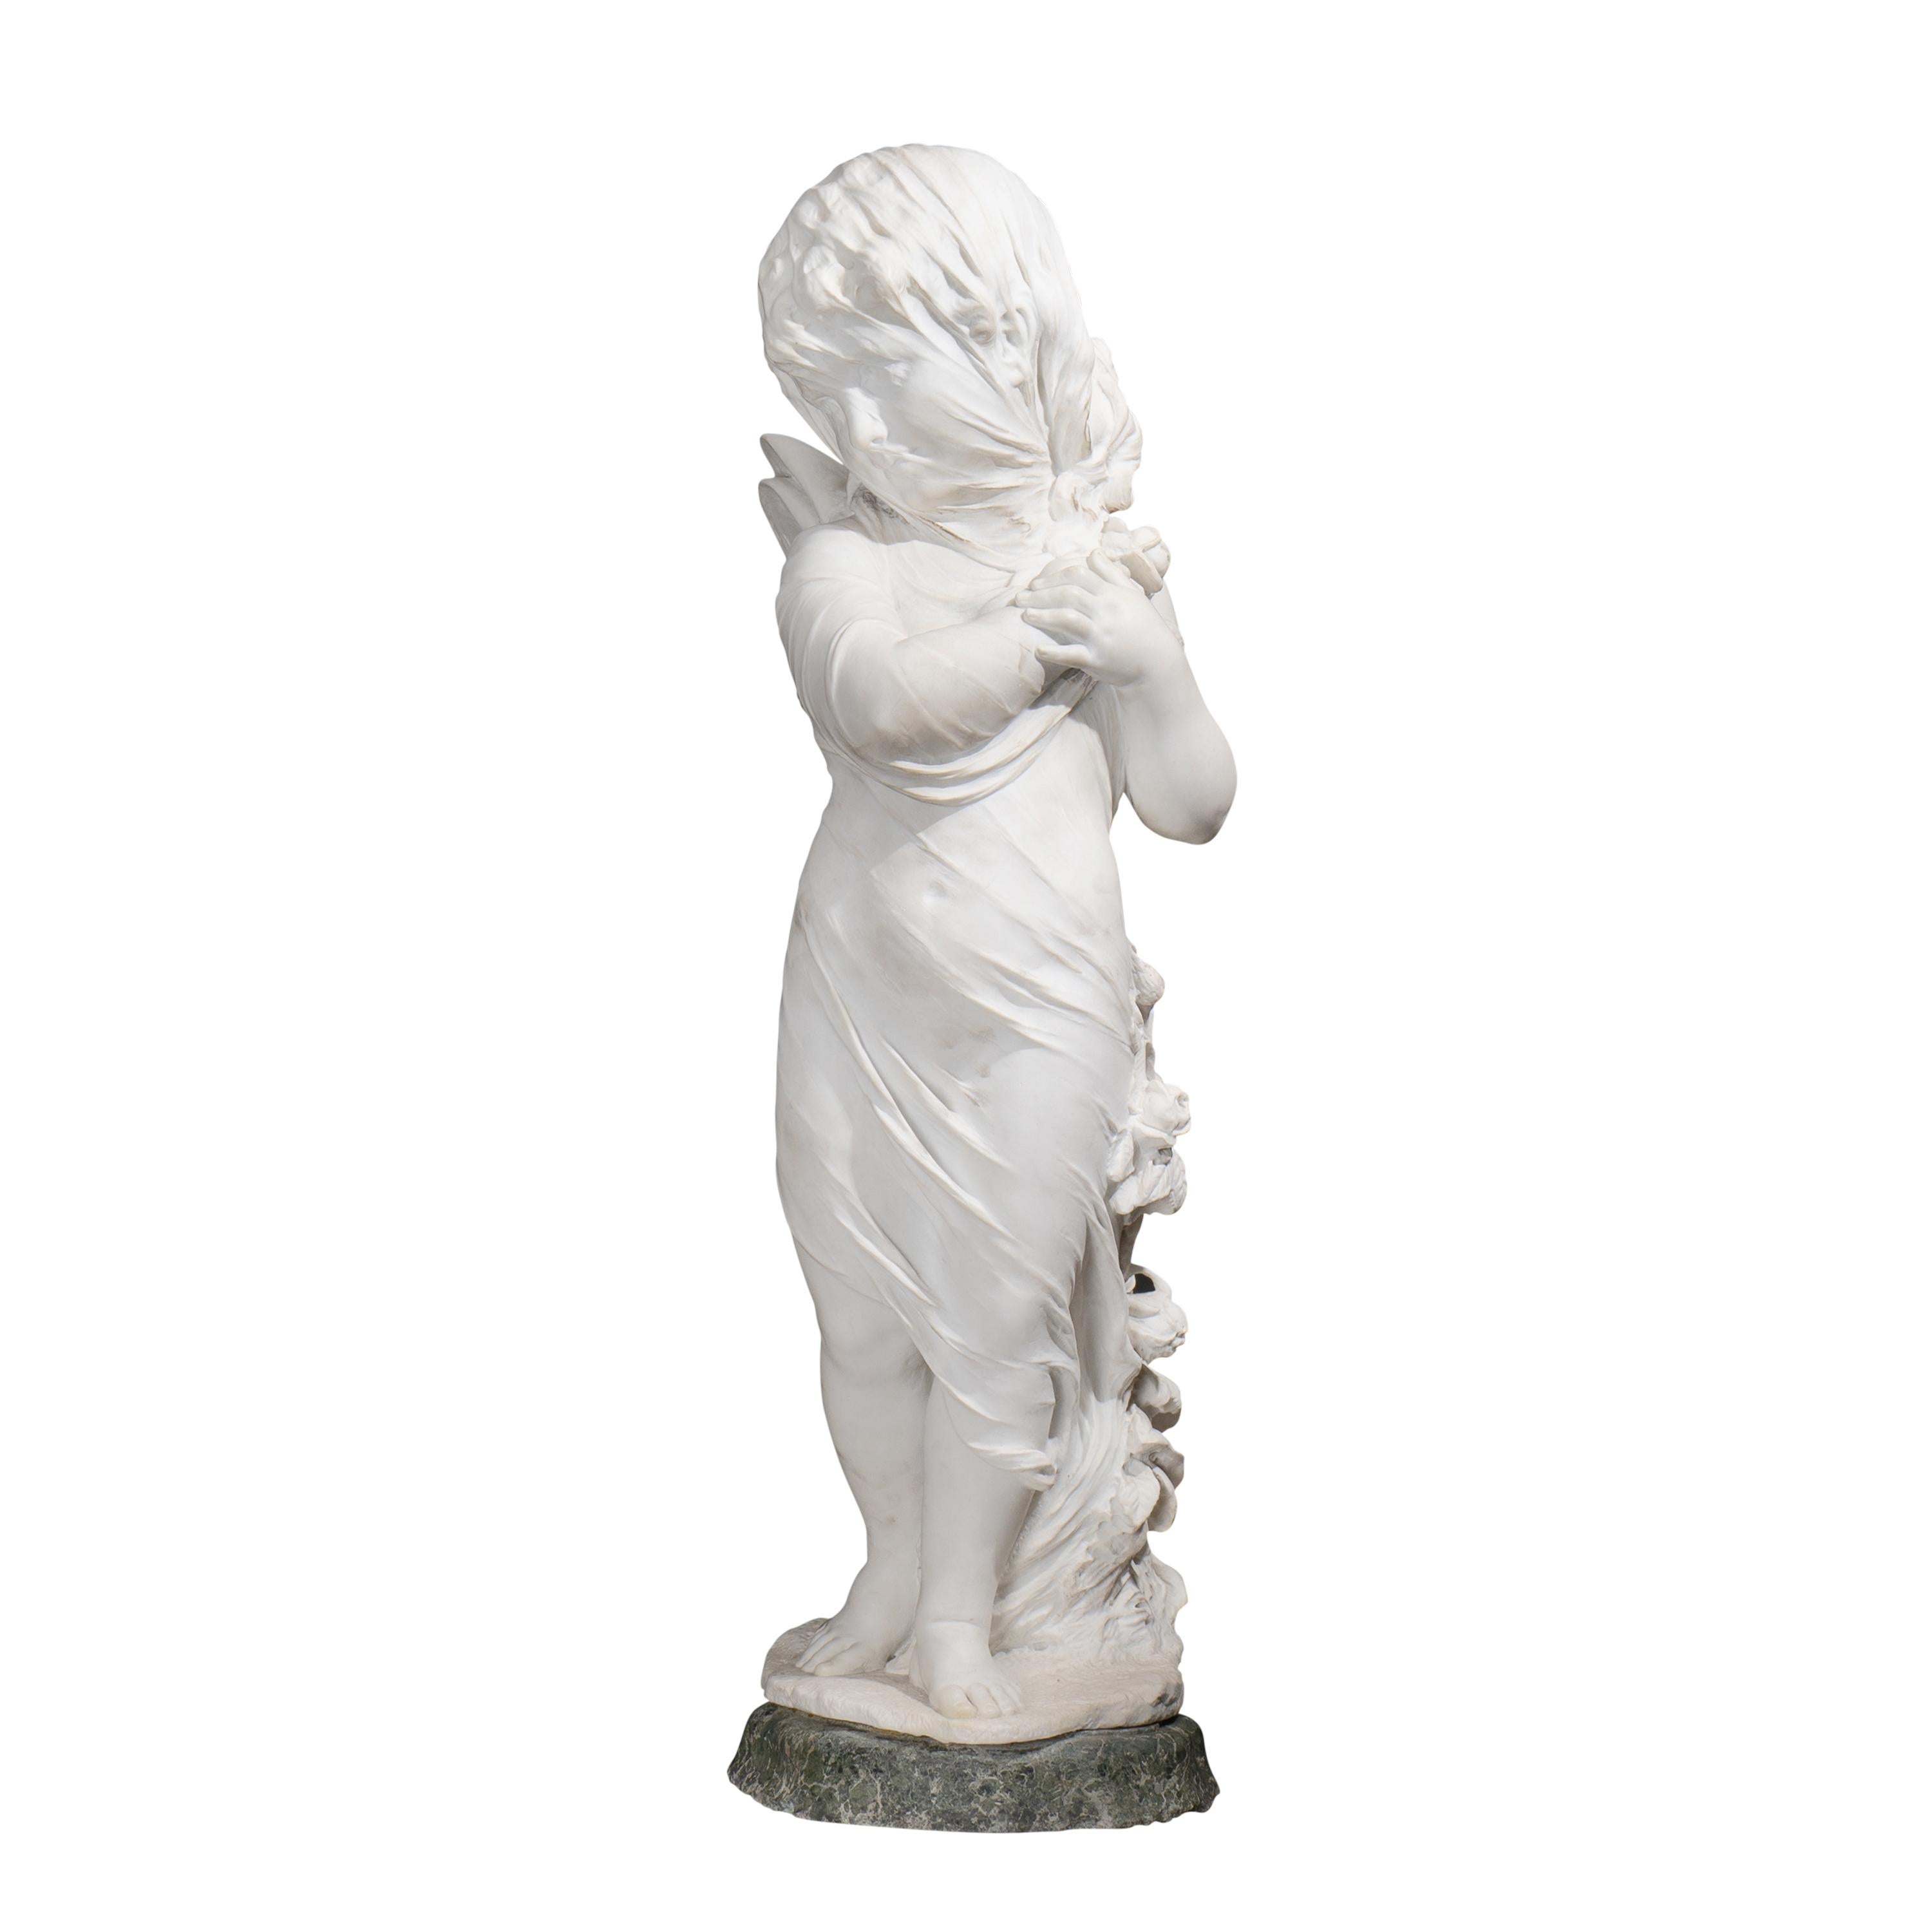 A sculpture by Orazio Andreoni from the late 19th to early 20th century portraying a veiled Cupid exudes an exquisite blend of classical artistry and romantic allure. Andreoni, known for his masterful craftsmanship, brings to life the timeless